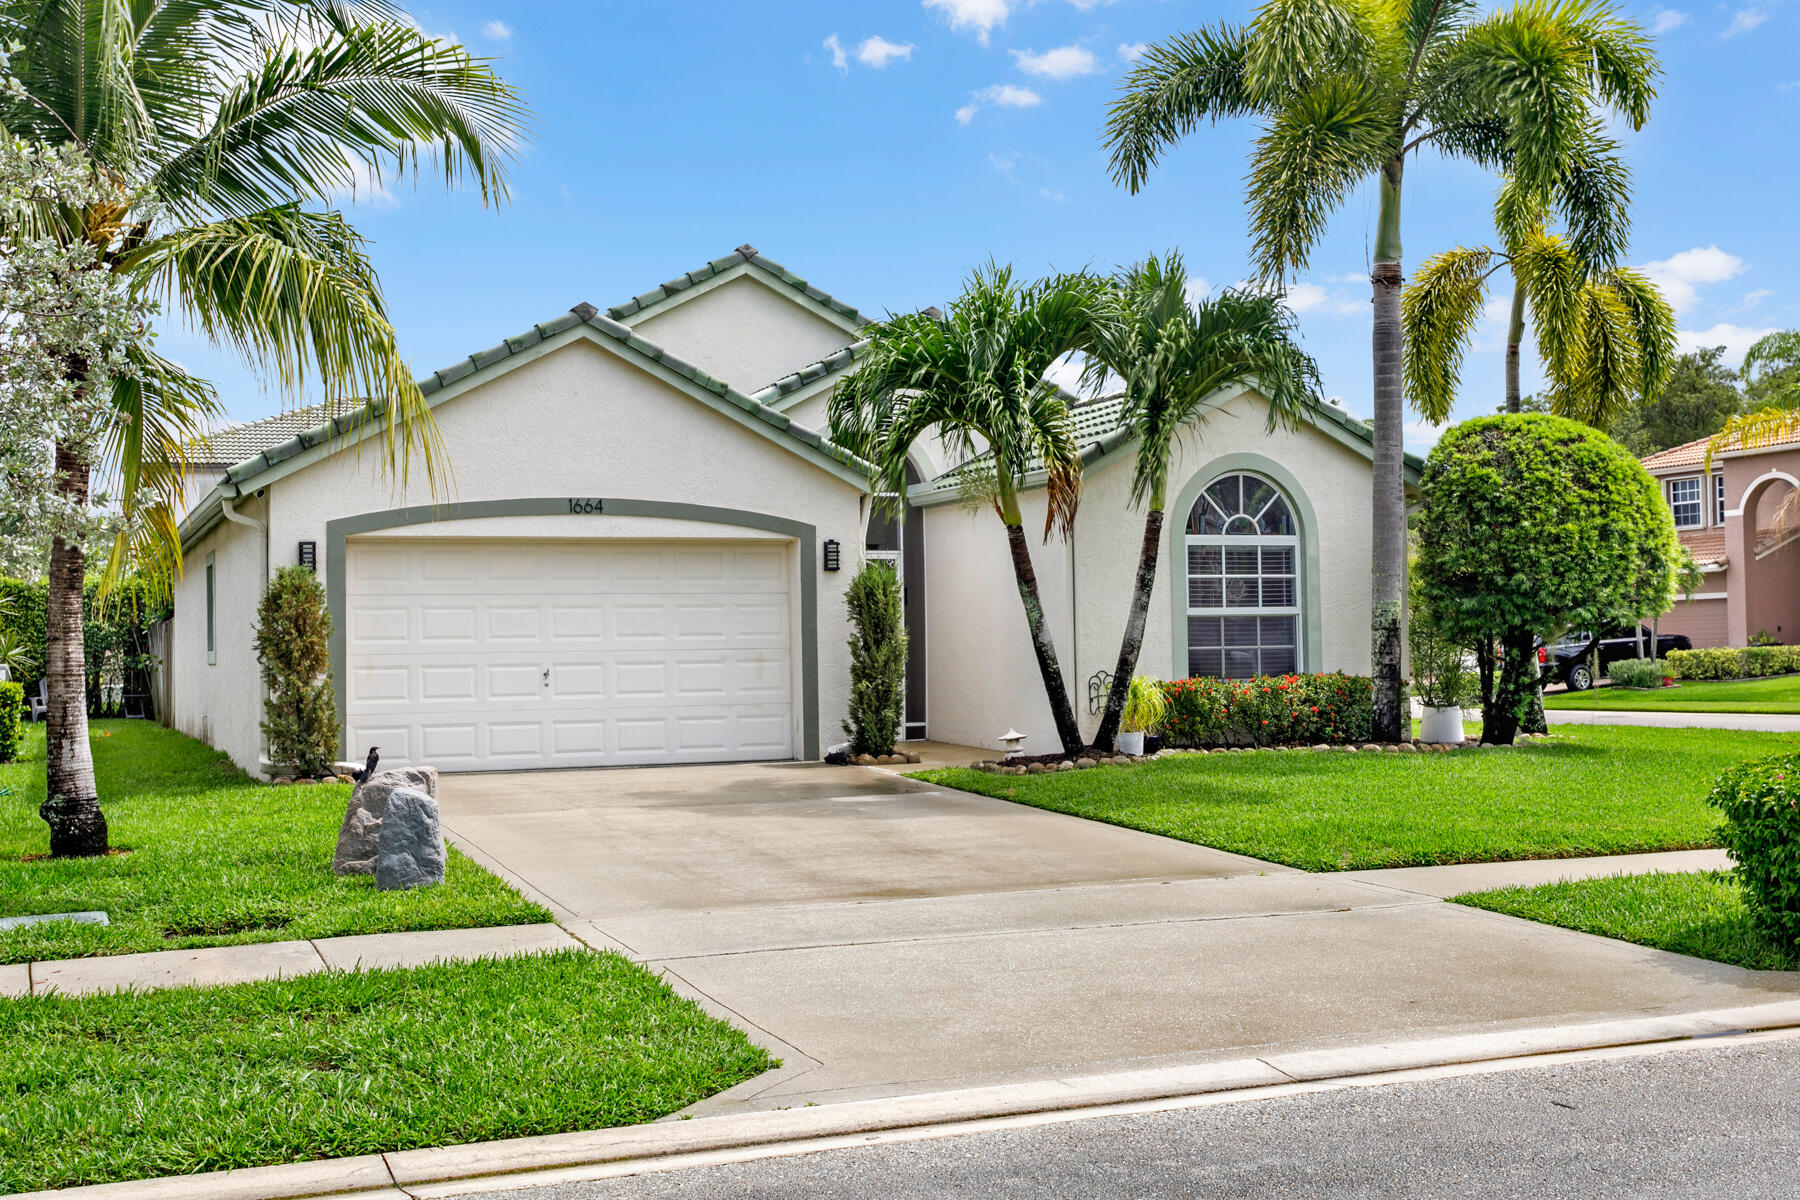 Property for Sale at 1664 Oak Berry Circle, Wellington, Palm Beach County, Florida - Bedrooms: 3 
Bathrooms: 2  - $600,000